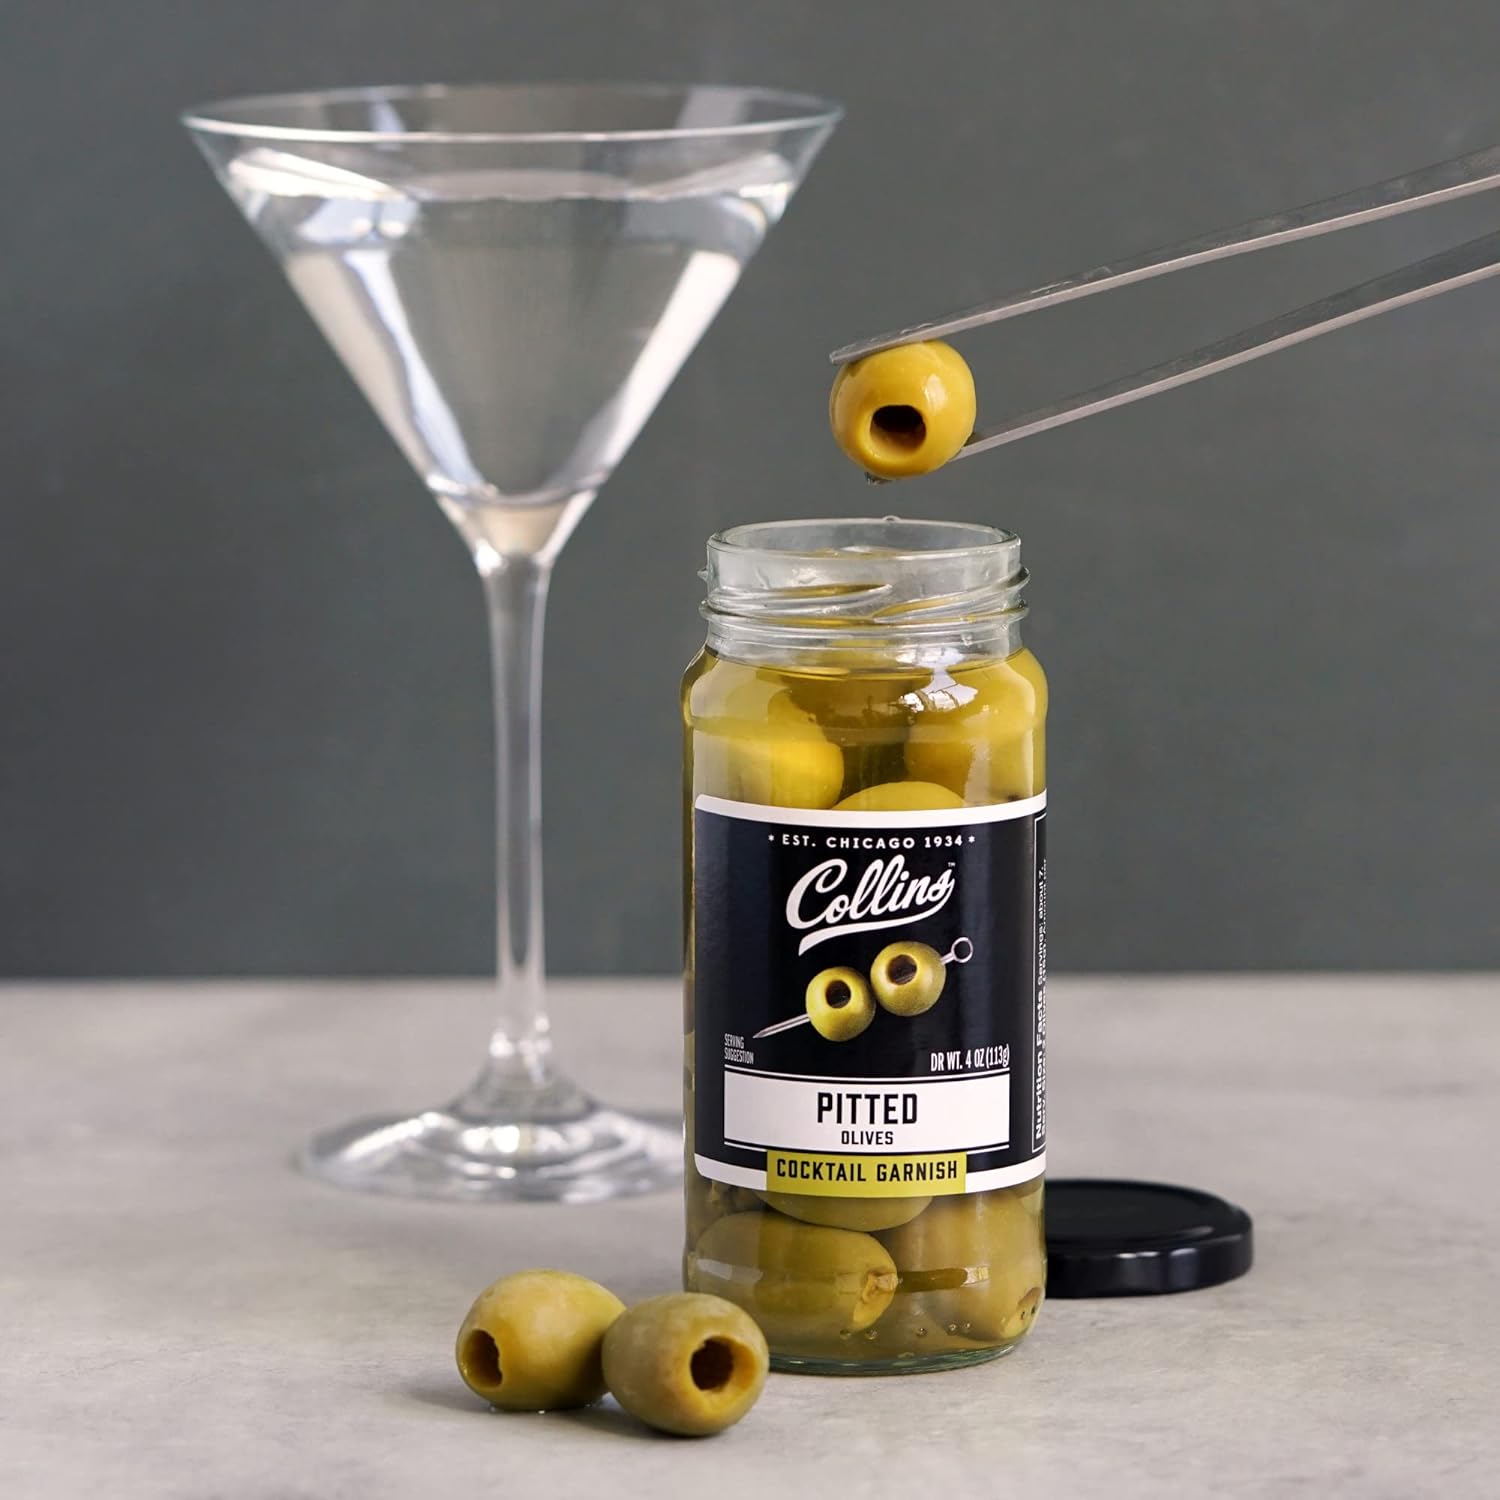 Collins Pitted Olives Popular Garnish for Cocktails, Dirty Martinis, Salads, Cheese Trays, Charcuterie, Snacks, 4oz, Black: Home & Kitchen